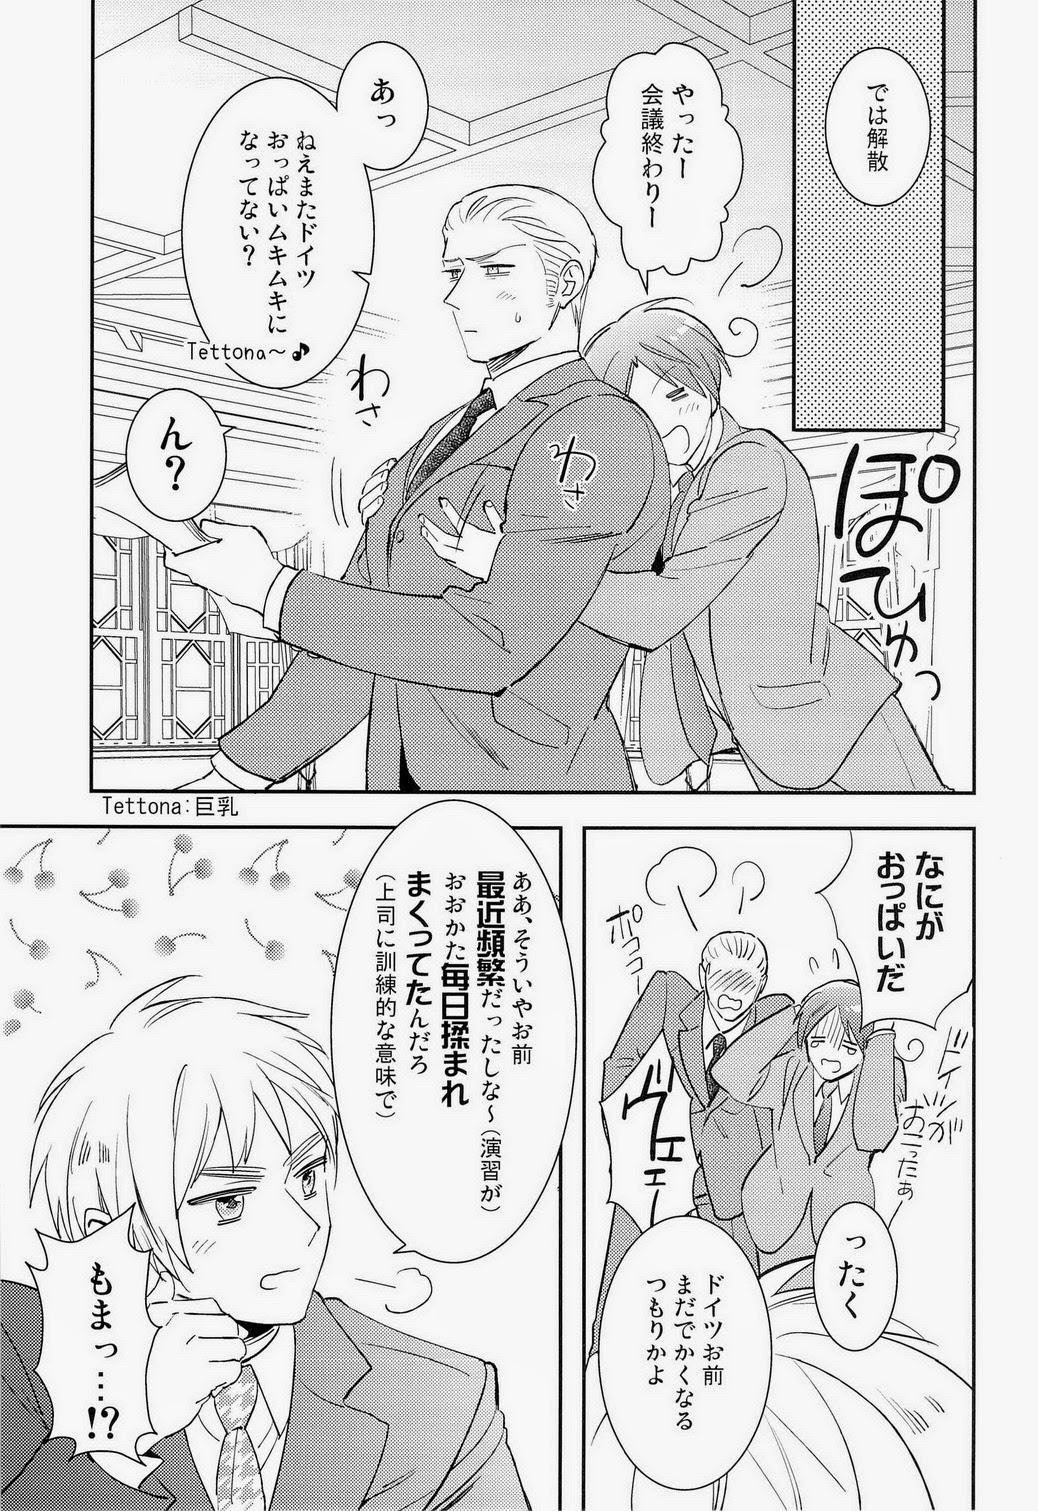 Stepfamily Ich mochte die Brust essen. - Axis powers hetalia Real Couple - Page 3